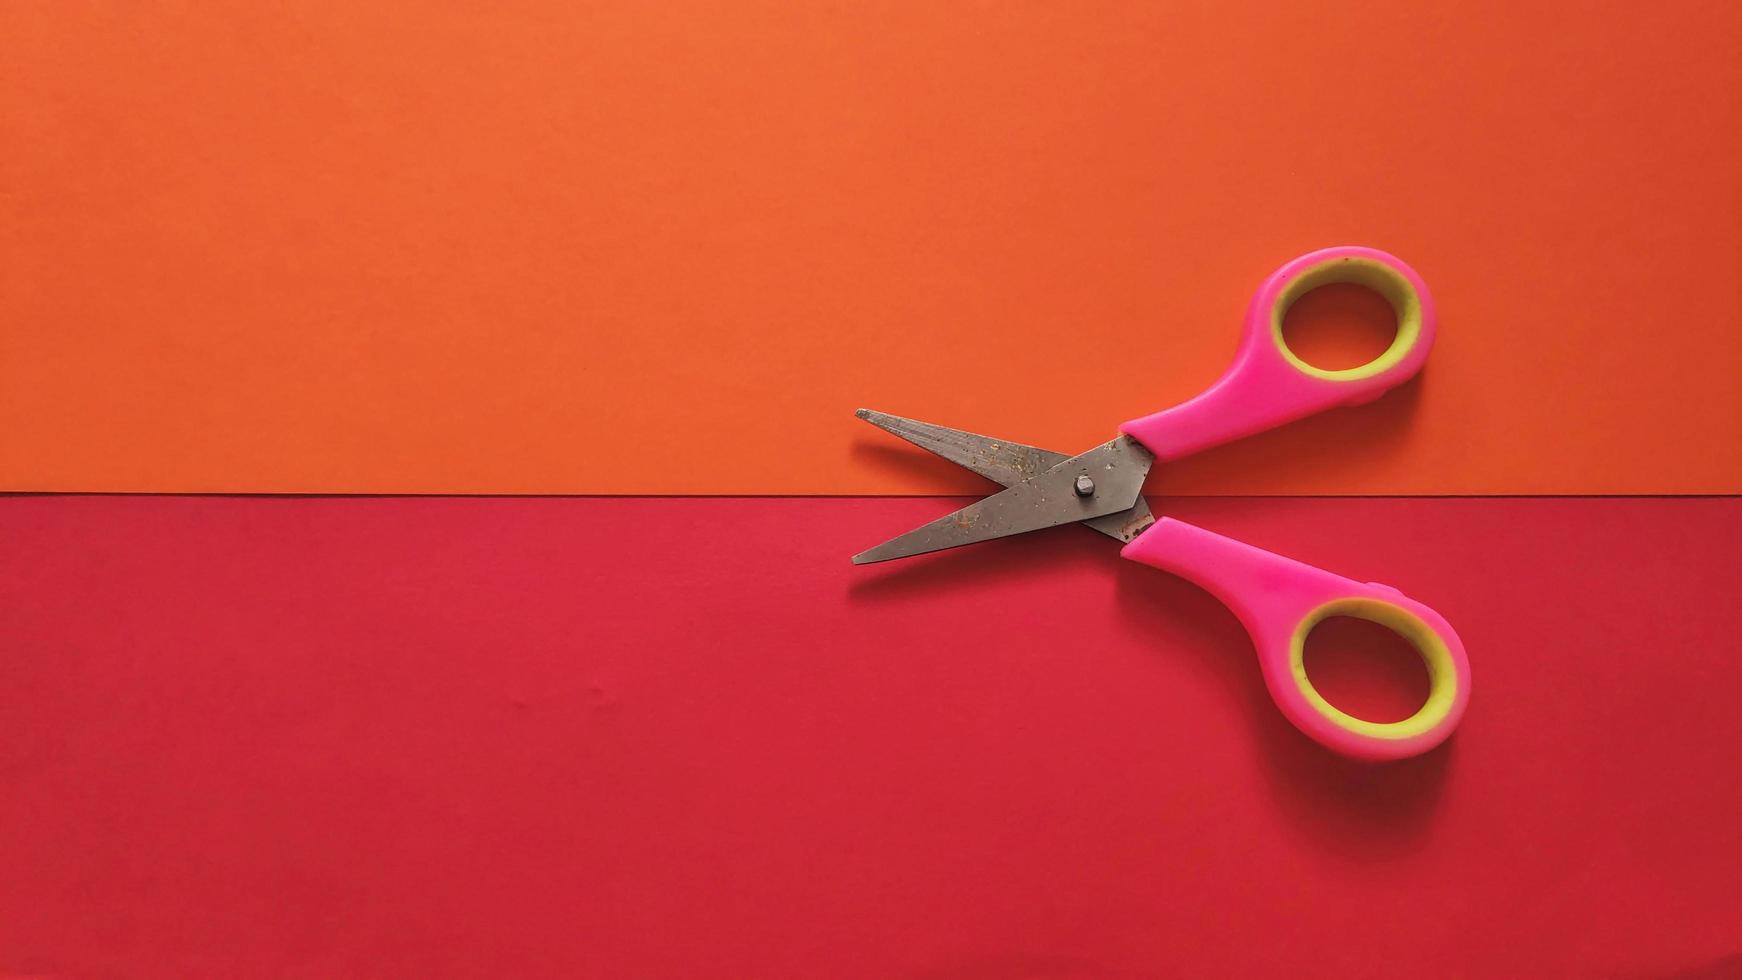 stationery scissors isolated on colored background photo